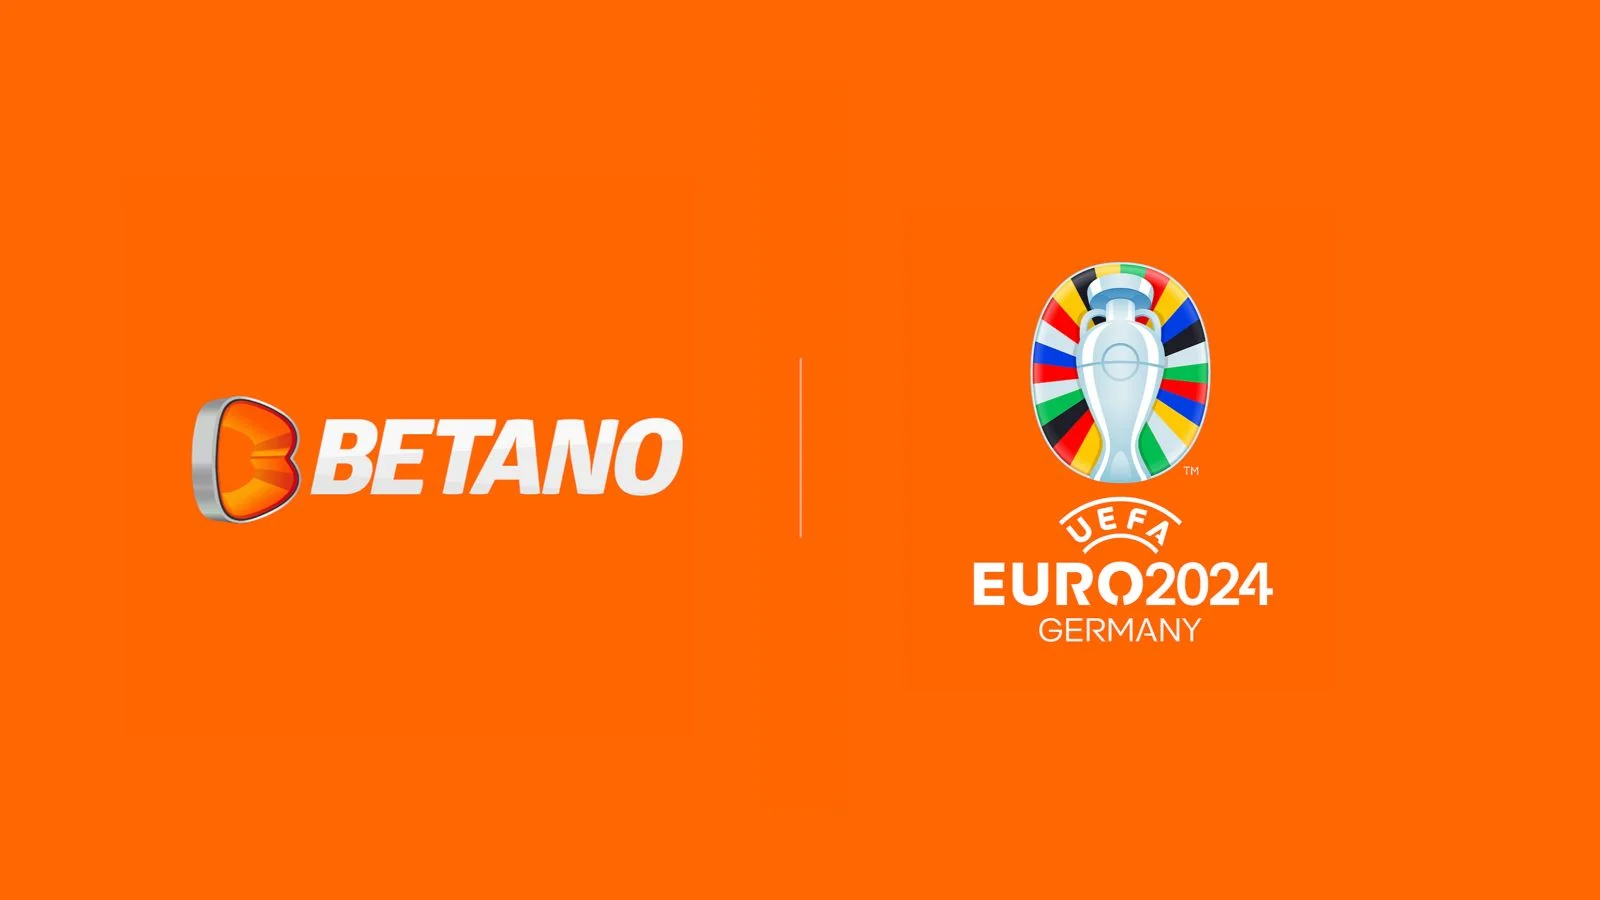 Betano Launch £5 Pre-Registration Free Bet Ahead of UK Launch Plus the Chance to win Euro 2024 Tickets